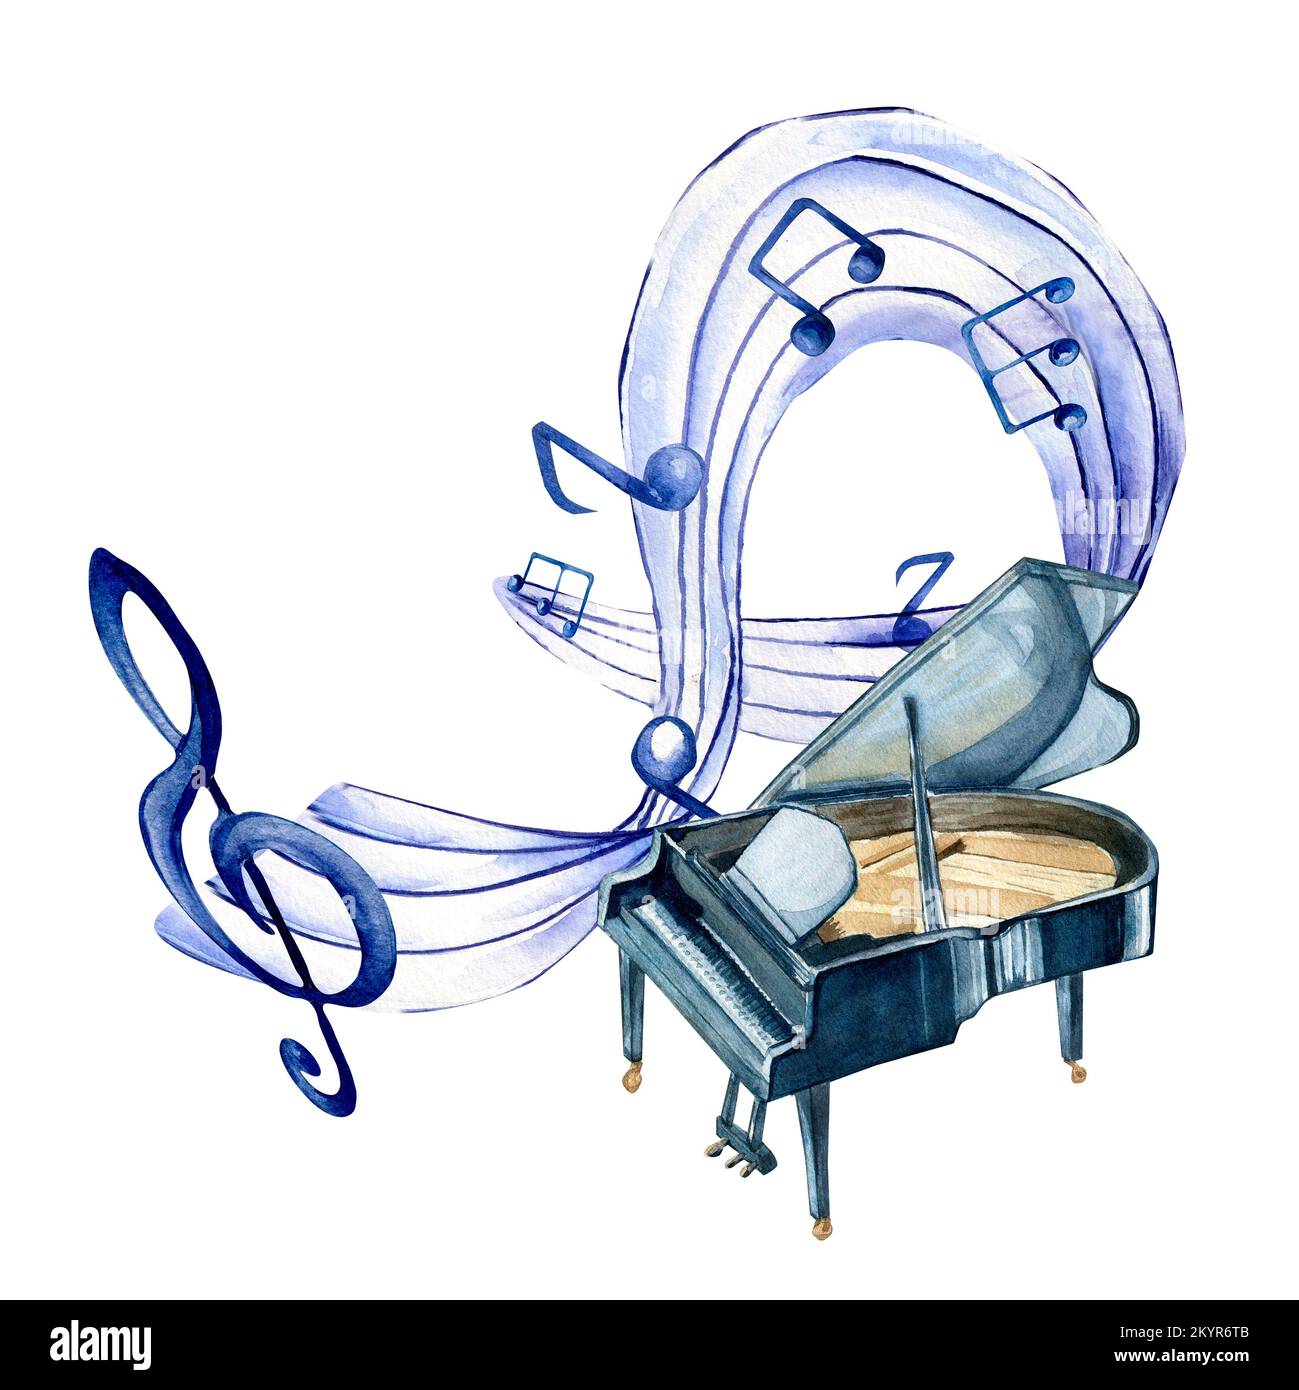 Treble clef, musical notes and grand piano watercolor illustration on white. Classical musical instrument and symbol hand drawn. Design for flyer, con Stock Photo